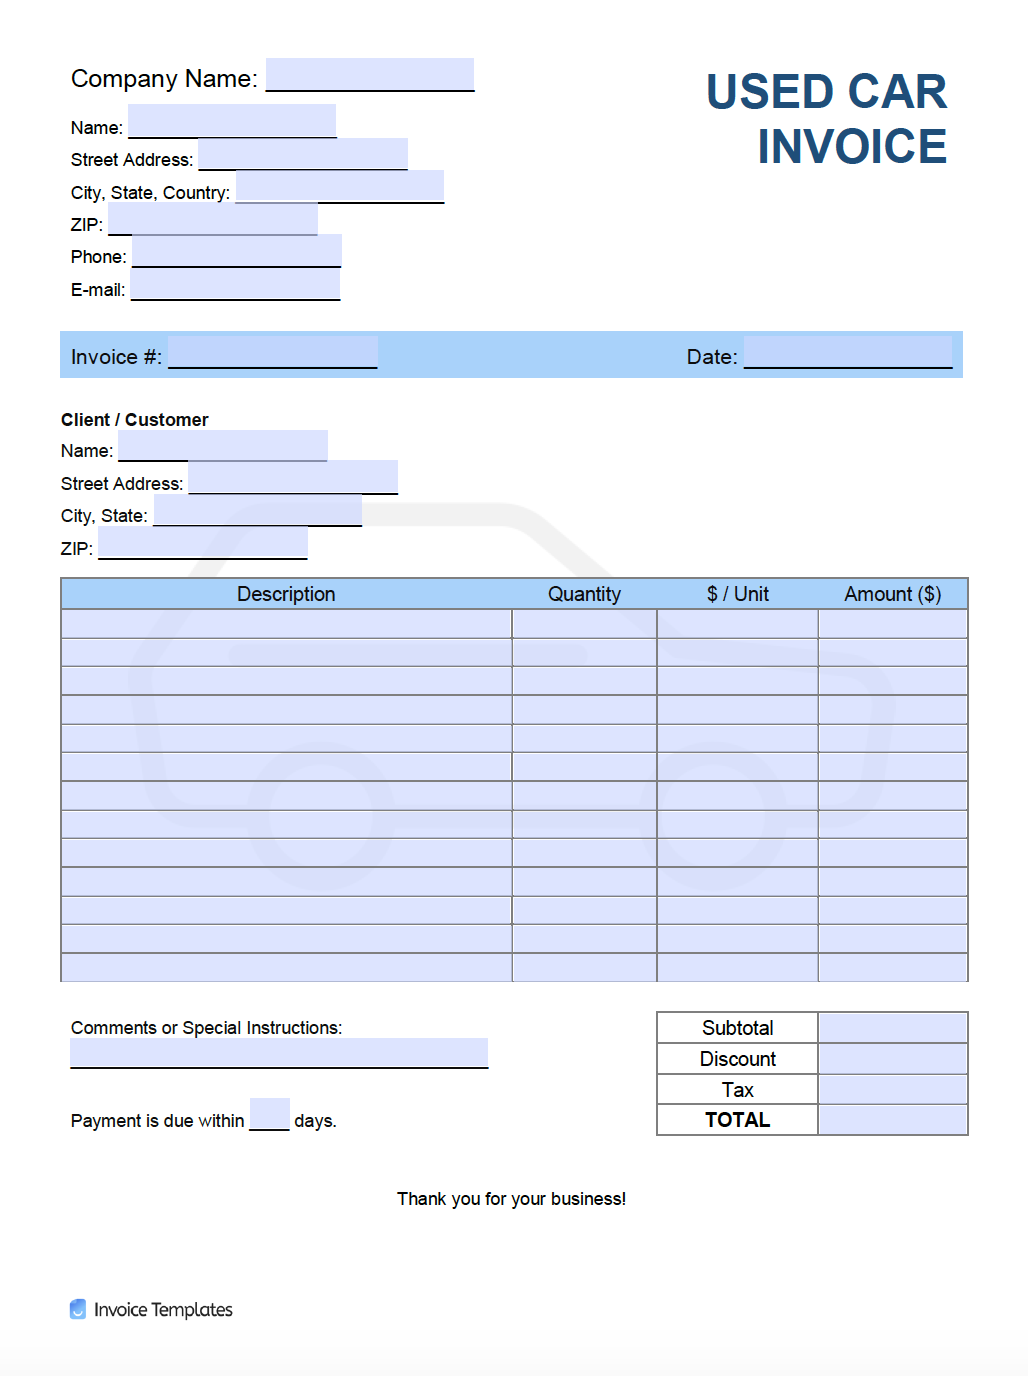 Free Used Car Invoice Template  PDF  WORD  EXCEL In Car Sales Invoice Template Free Download